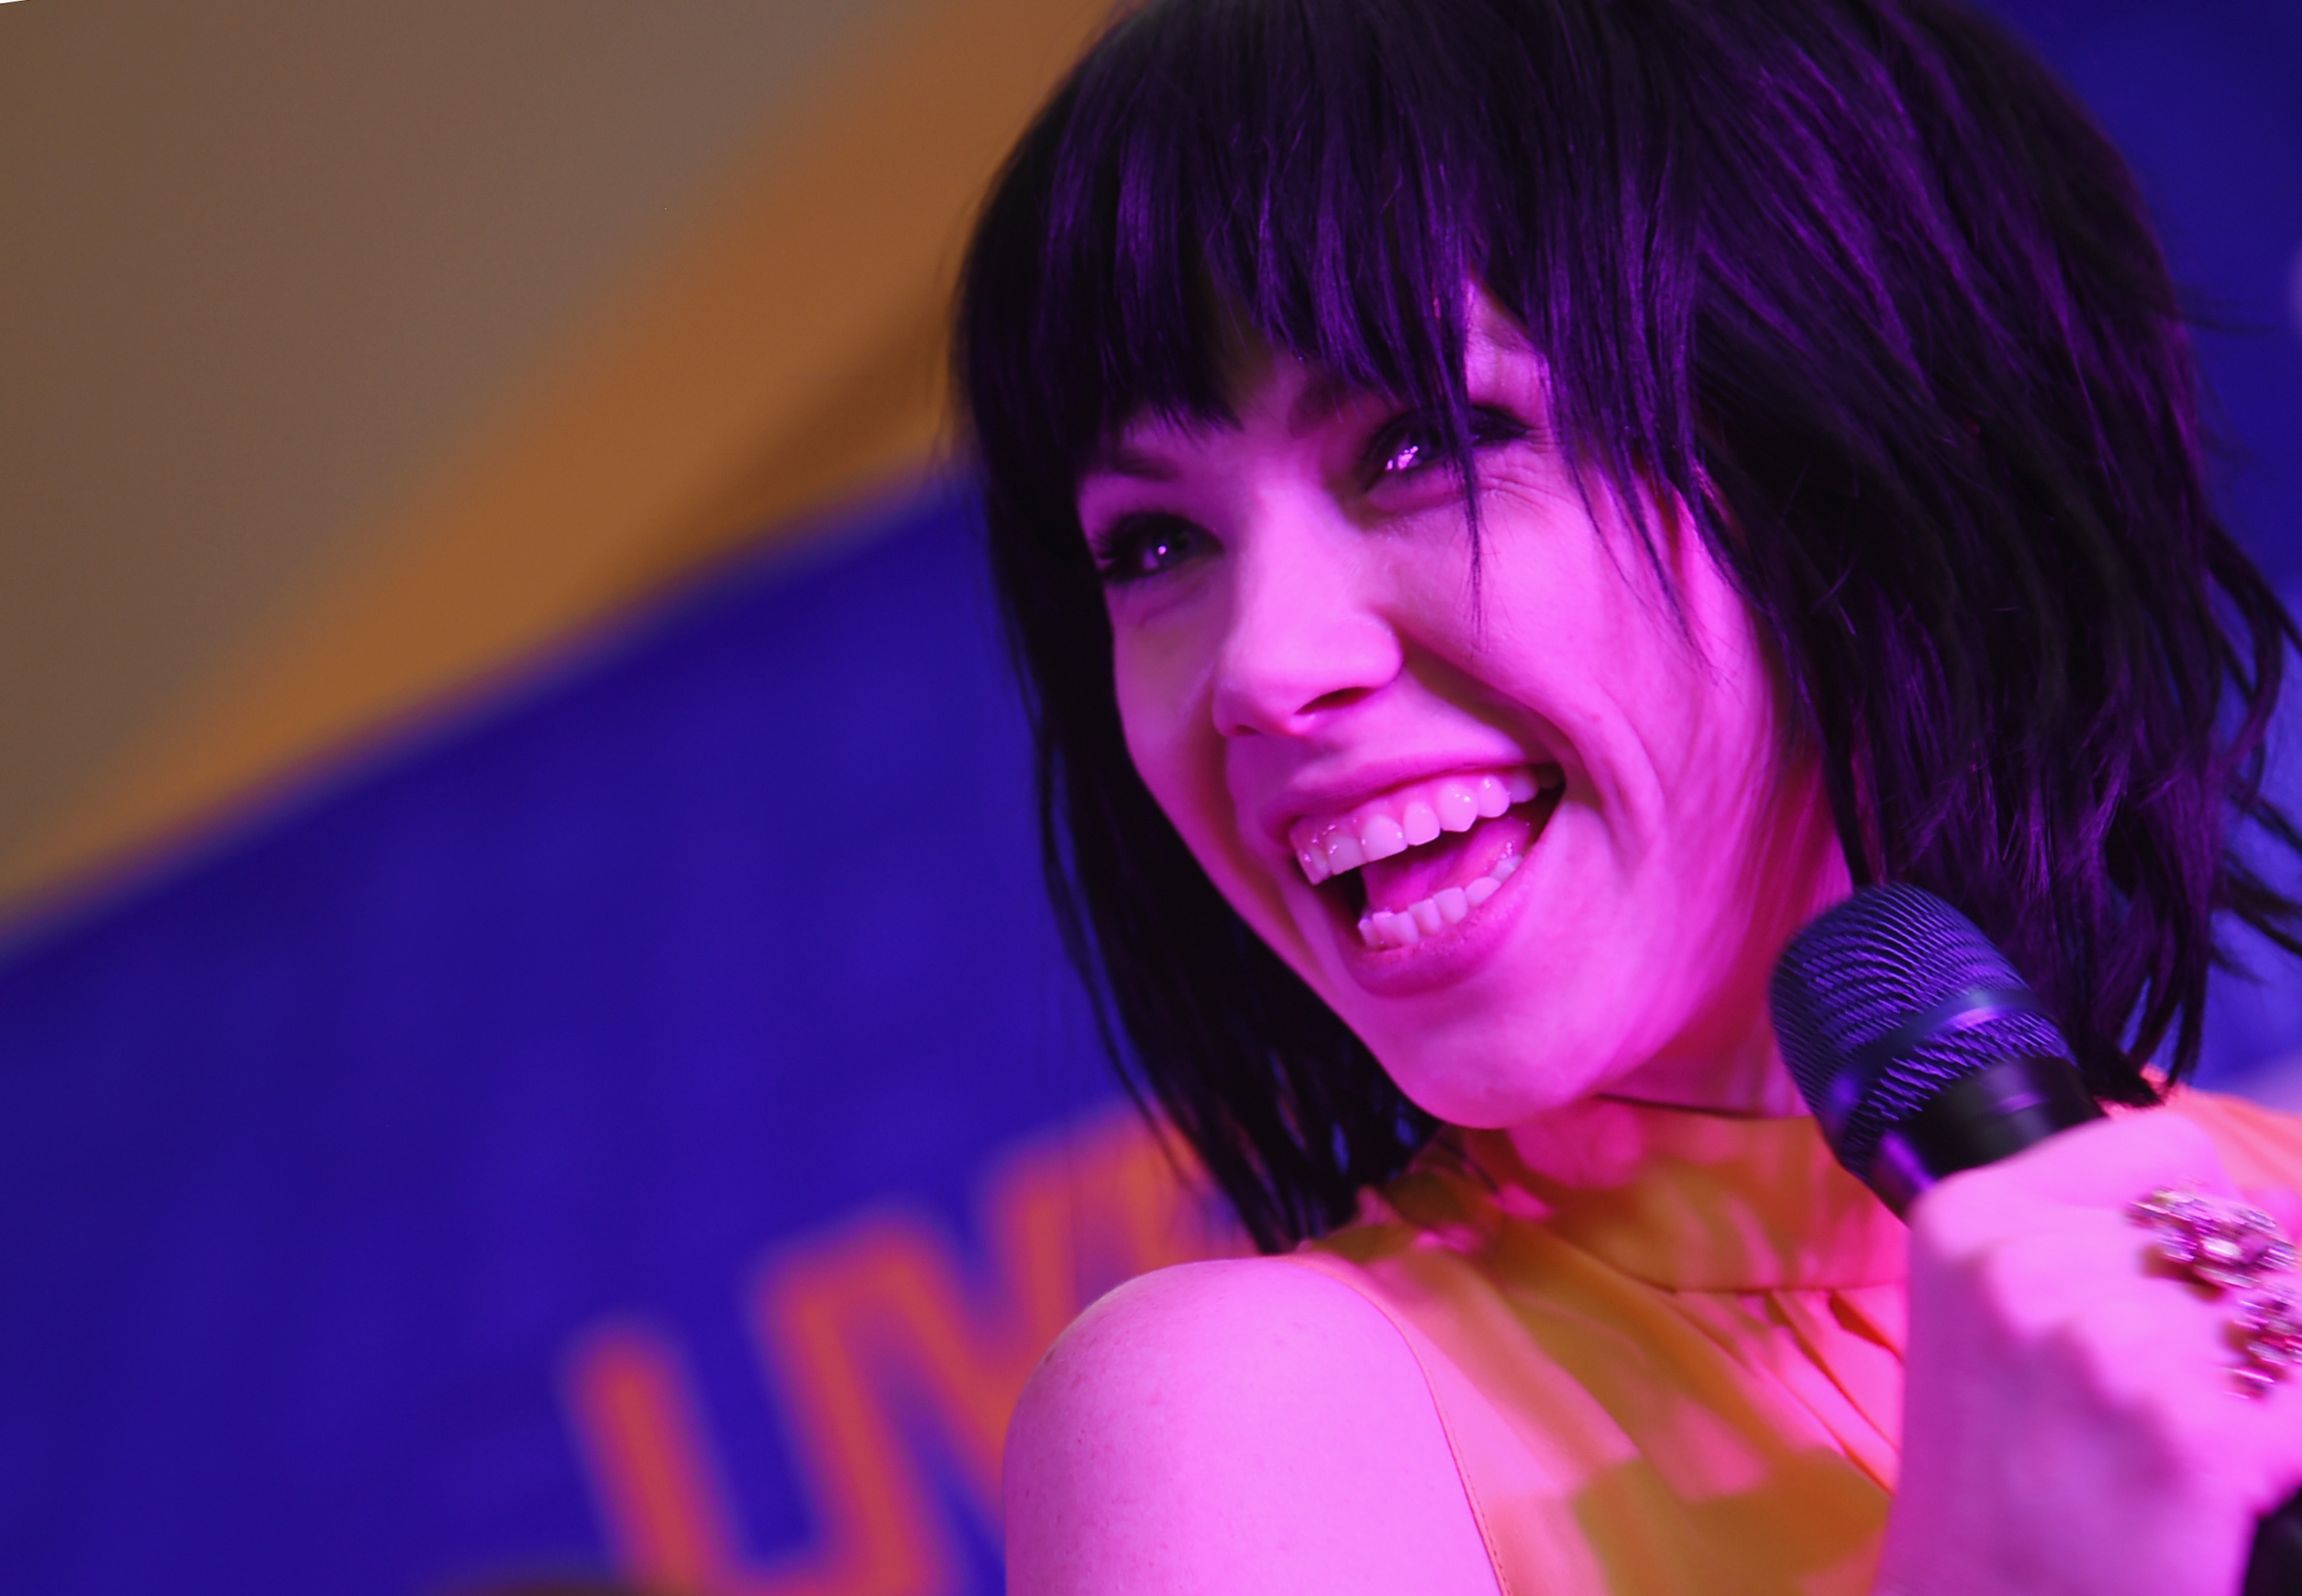 Singer Carly Rae Jepsen performs during JetBlue's Live From T5 at John F. Kennedy International Airport on August 20, 2015 in New York City. (Michael Loccisano—Getty Images)